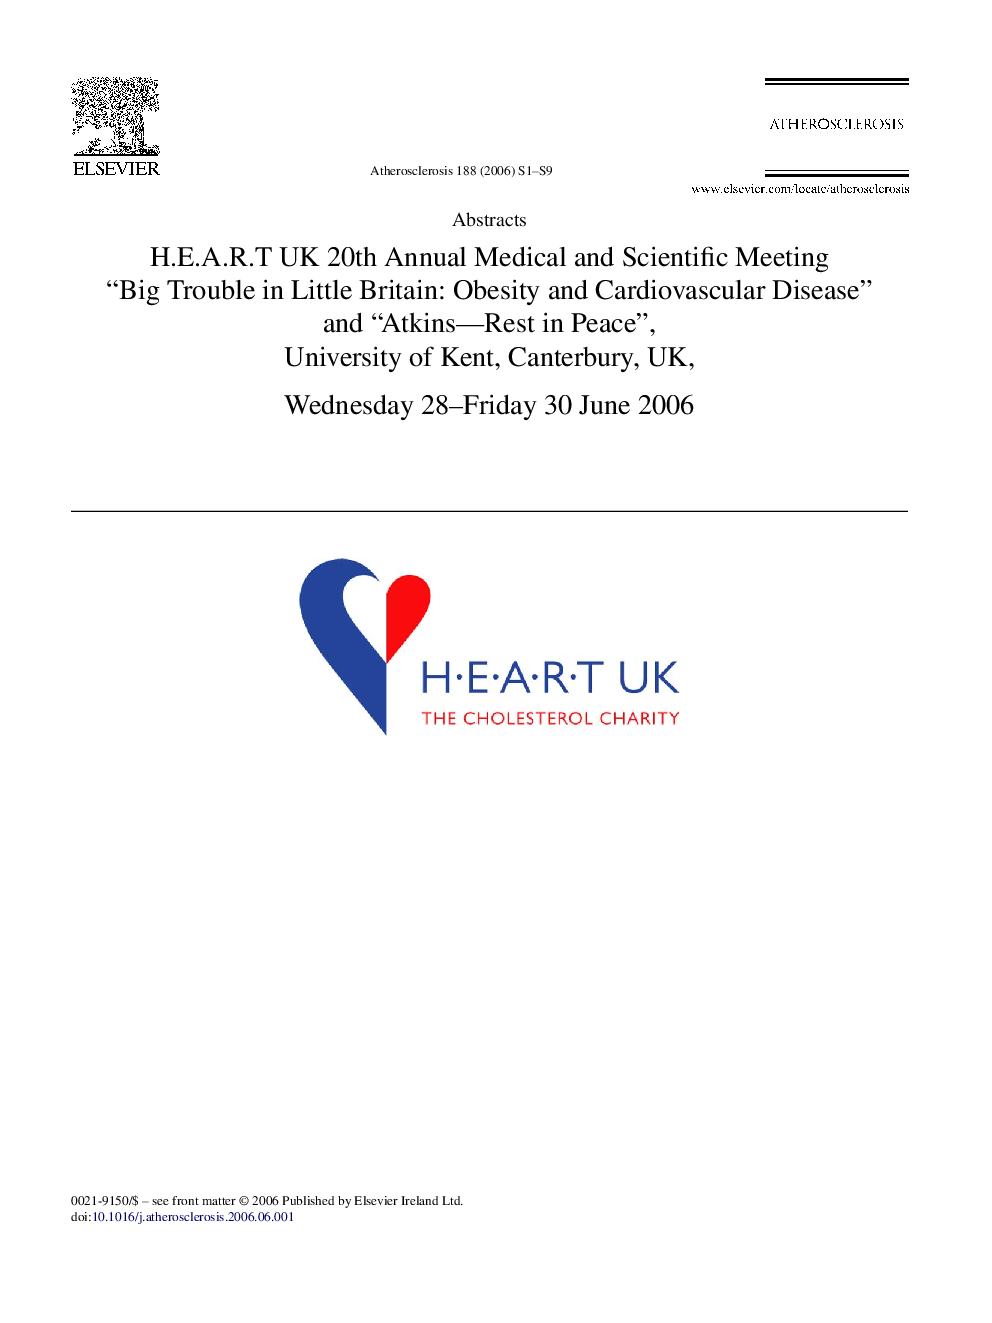 ABSTRACTS: H.E.A.R.T UK 20th Annual Medical & Scientific Meeting